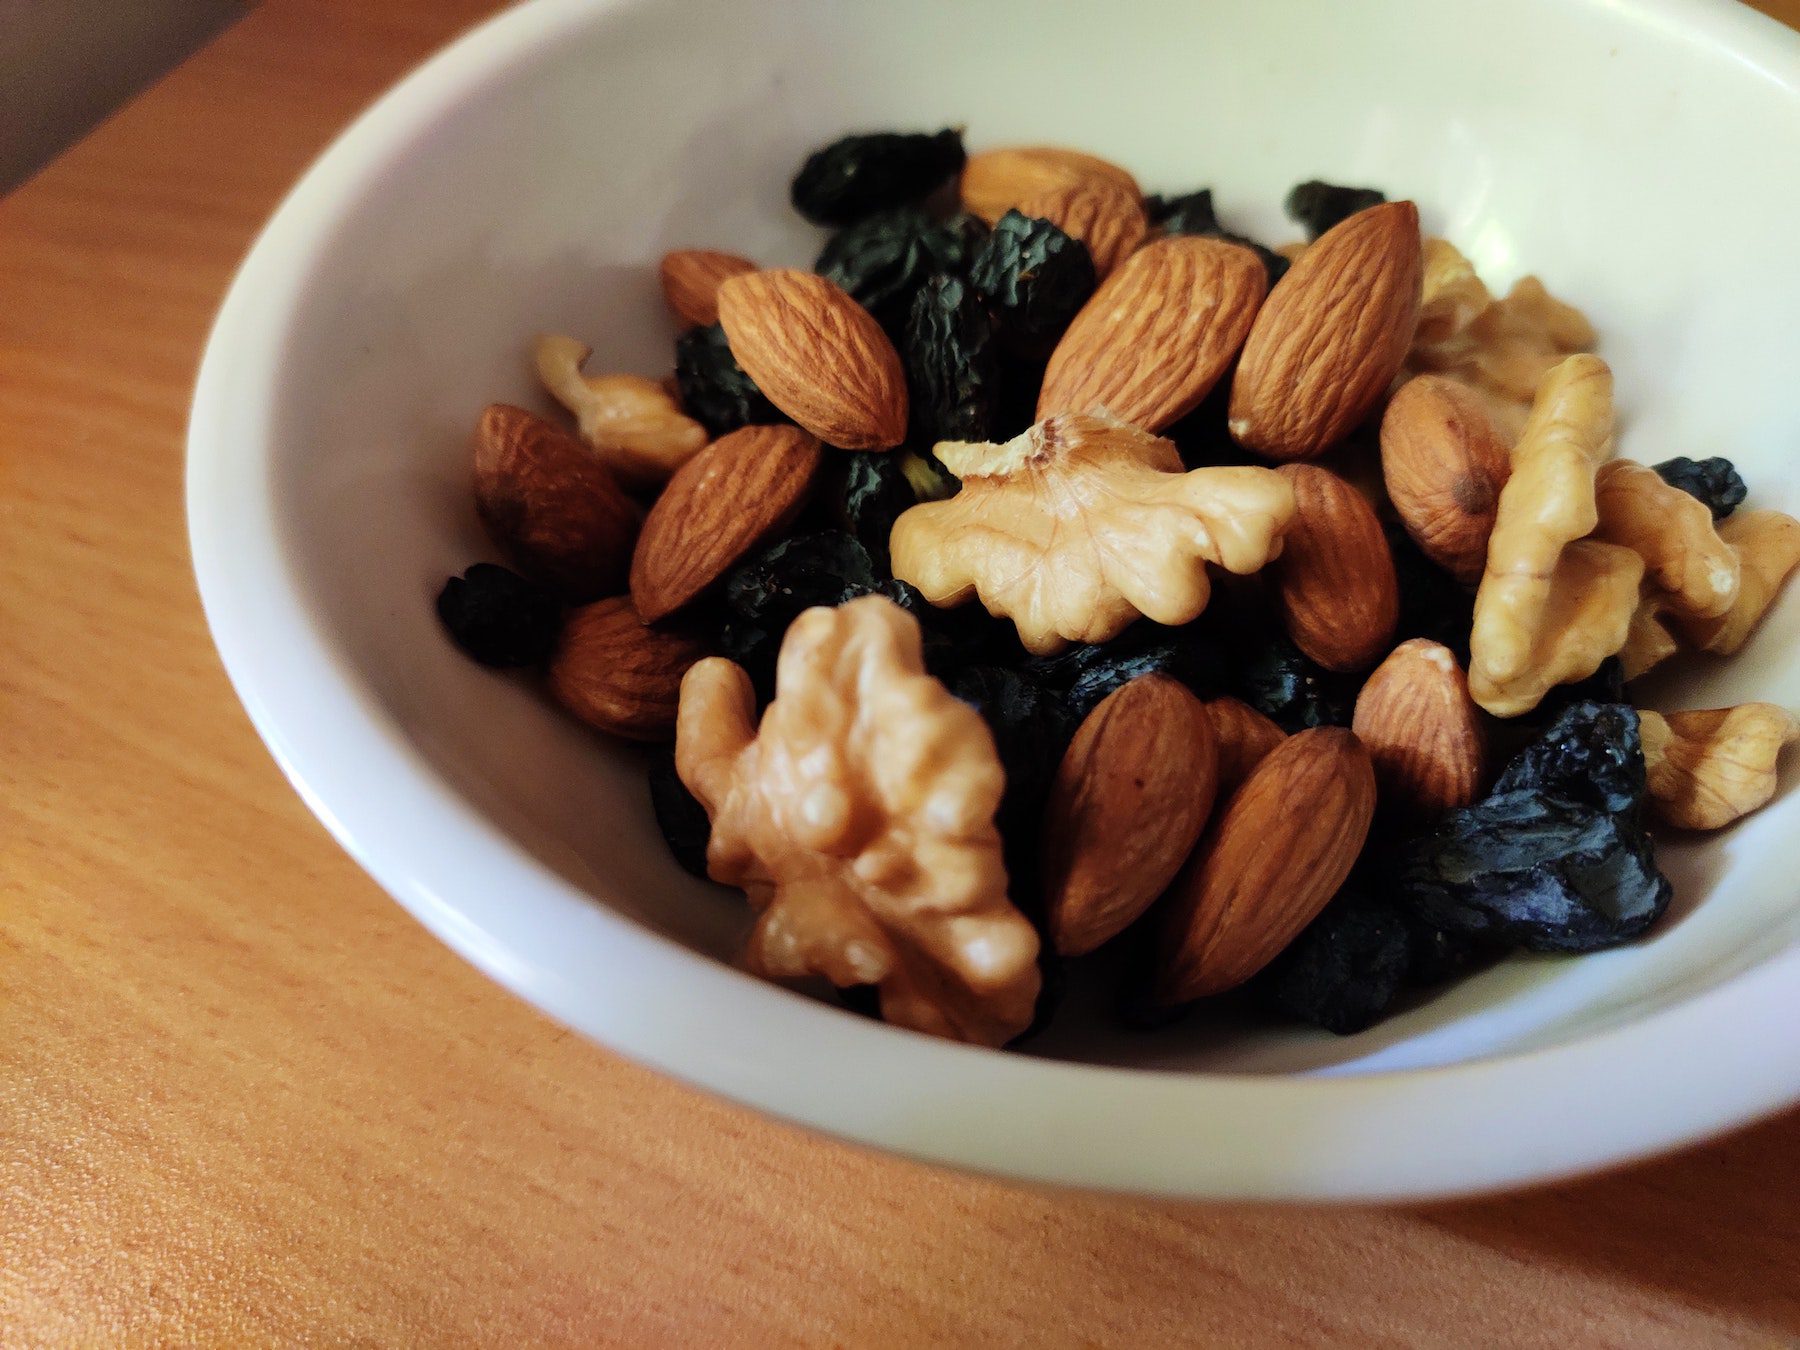 A white ceramic bowl of mixed nuts including almonds and walnuts on a wooden table. 